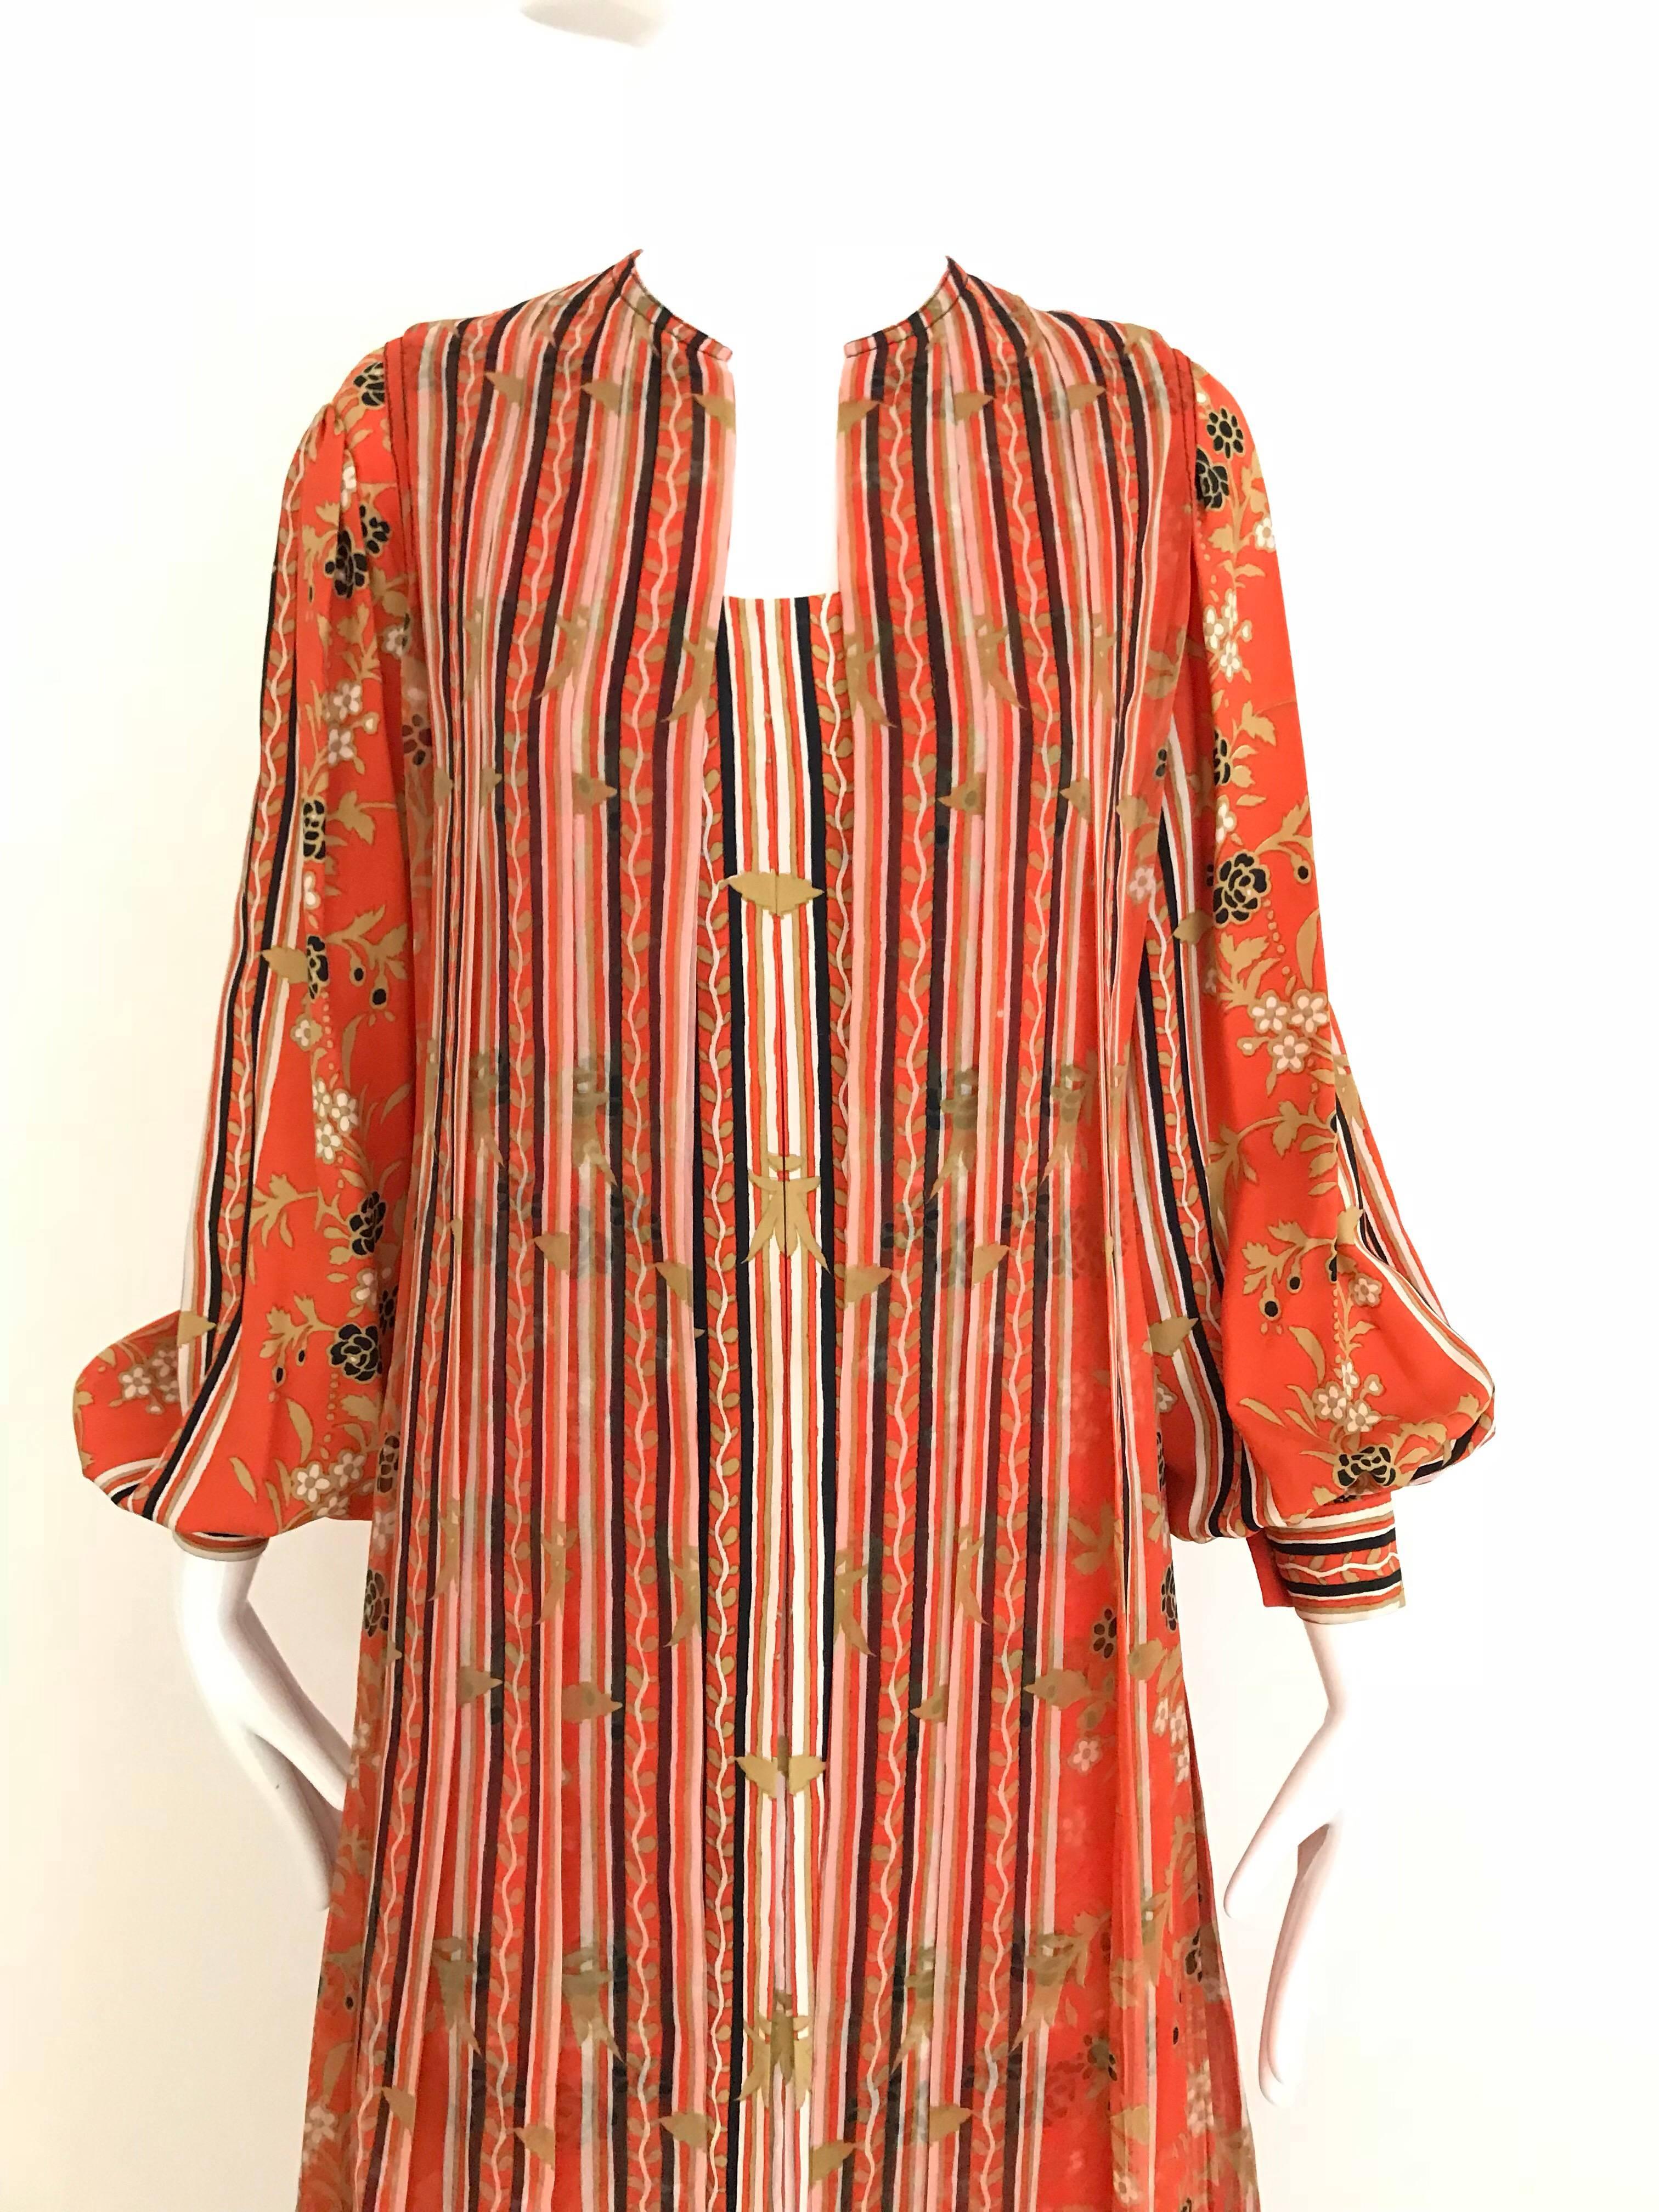 Beautiful vintage Galanos Orange and black floral print silk dress with maxi vest. 
Dress is lined in silk. 
Size 4 / Small
